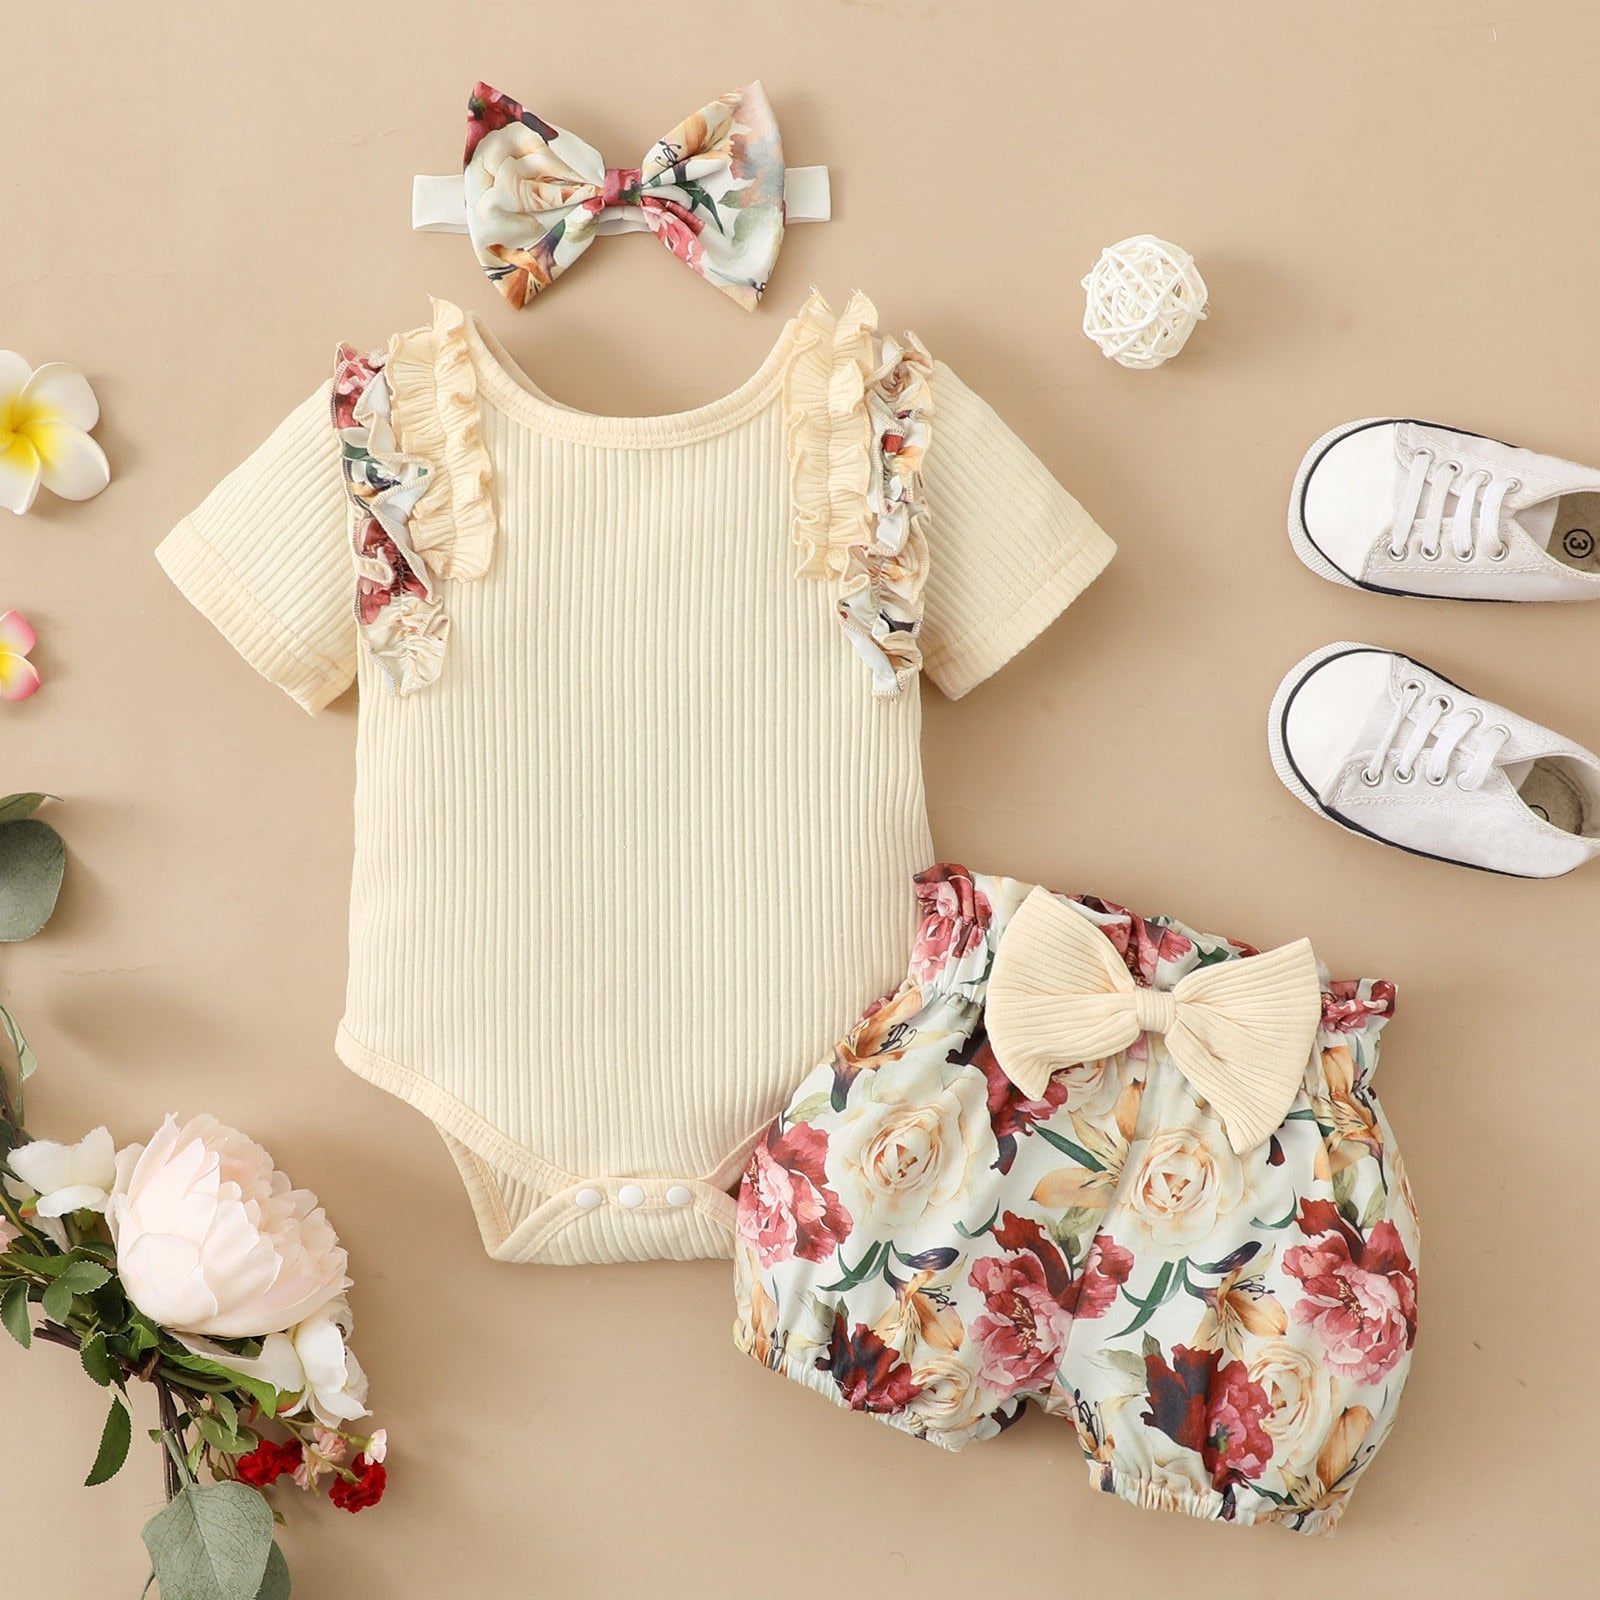 Adorable Summer Style: Newborn Baby Girl Clothes Set with Ruffle Romper, Floral Shorts and Headband